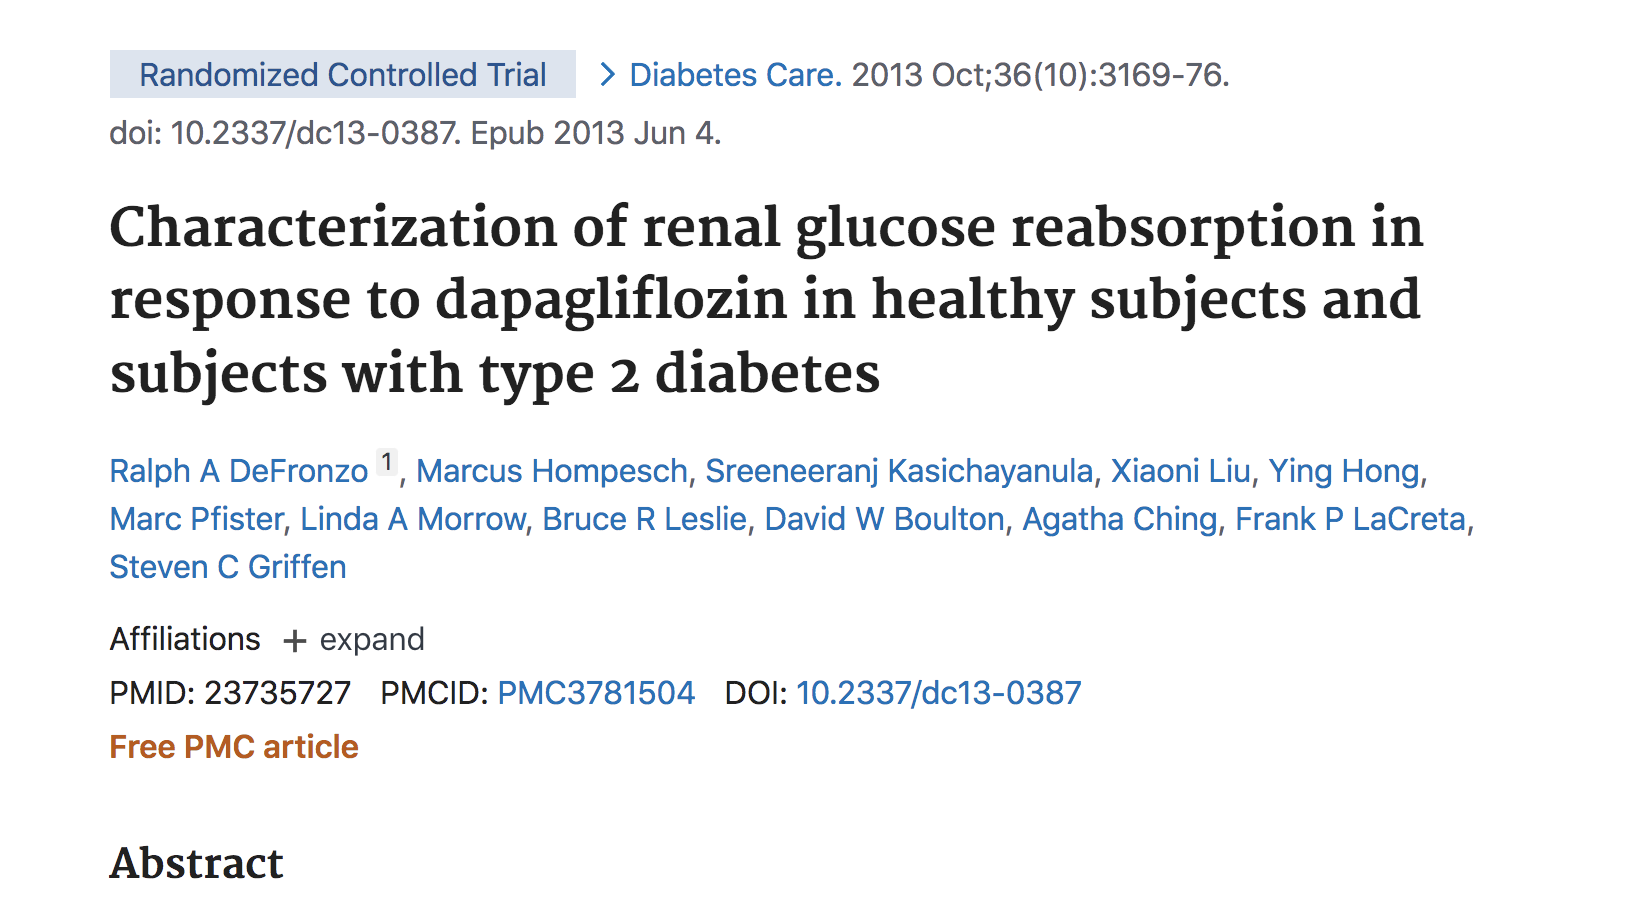 Characterization of renal glucose reabsorption in response to dapagliflozin in healthy subjects and subjects with type 2 diabetes thumbnail